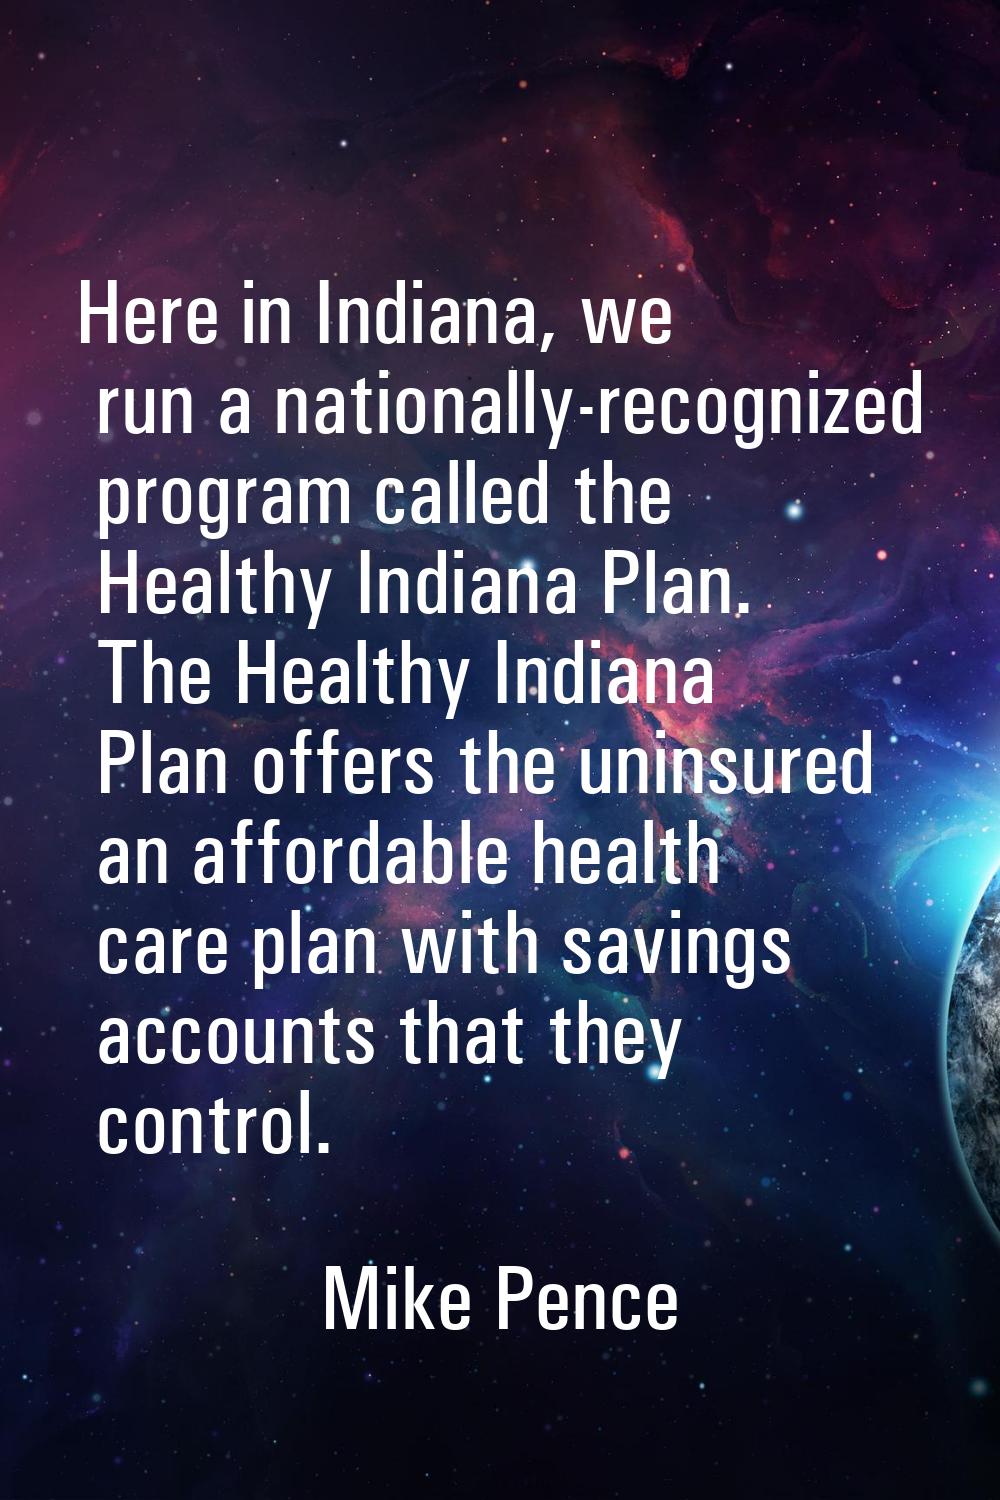 Here in Indiana, we run a nationally-recognized program called the Healthy Indiana Plan. The Health